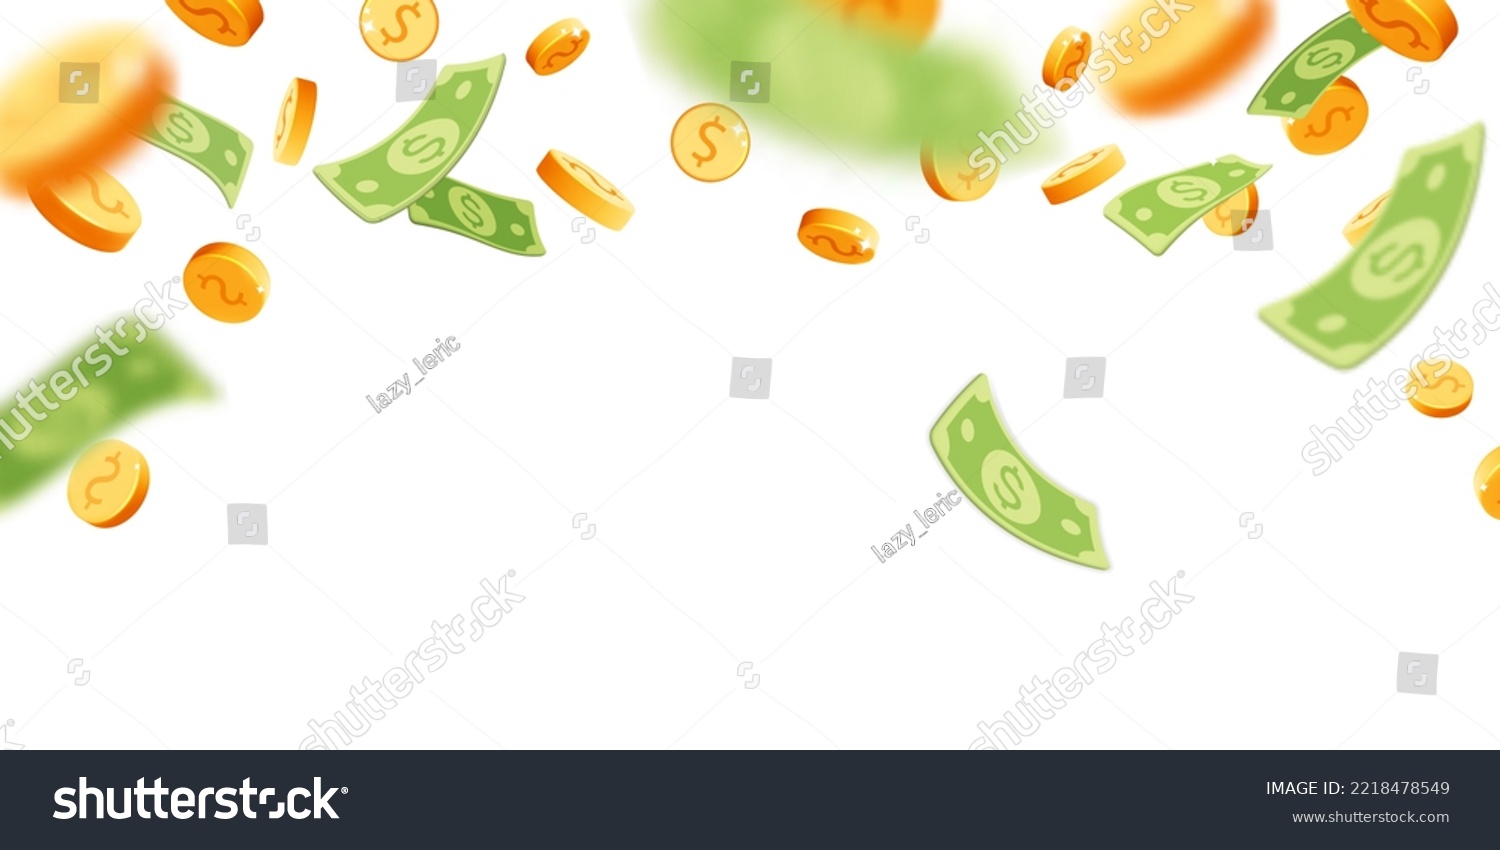 SVG of 3d vector floating in the air gold rain coins and green dollar paper currency banner design. Realistic render falling down or explosion money. Casino, jack pot, gold mine wealth, cash back concept. svg